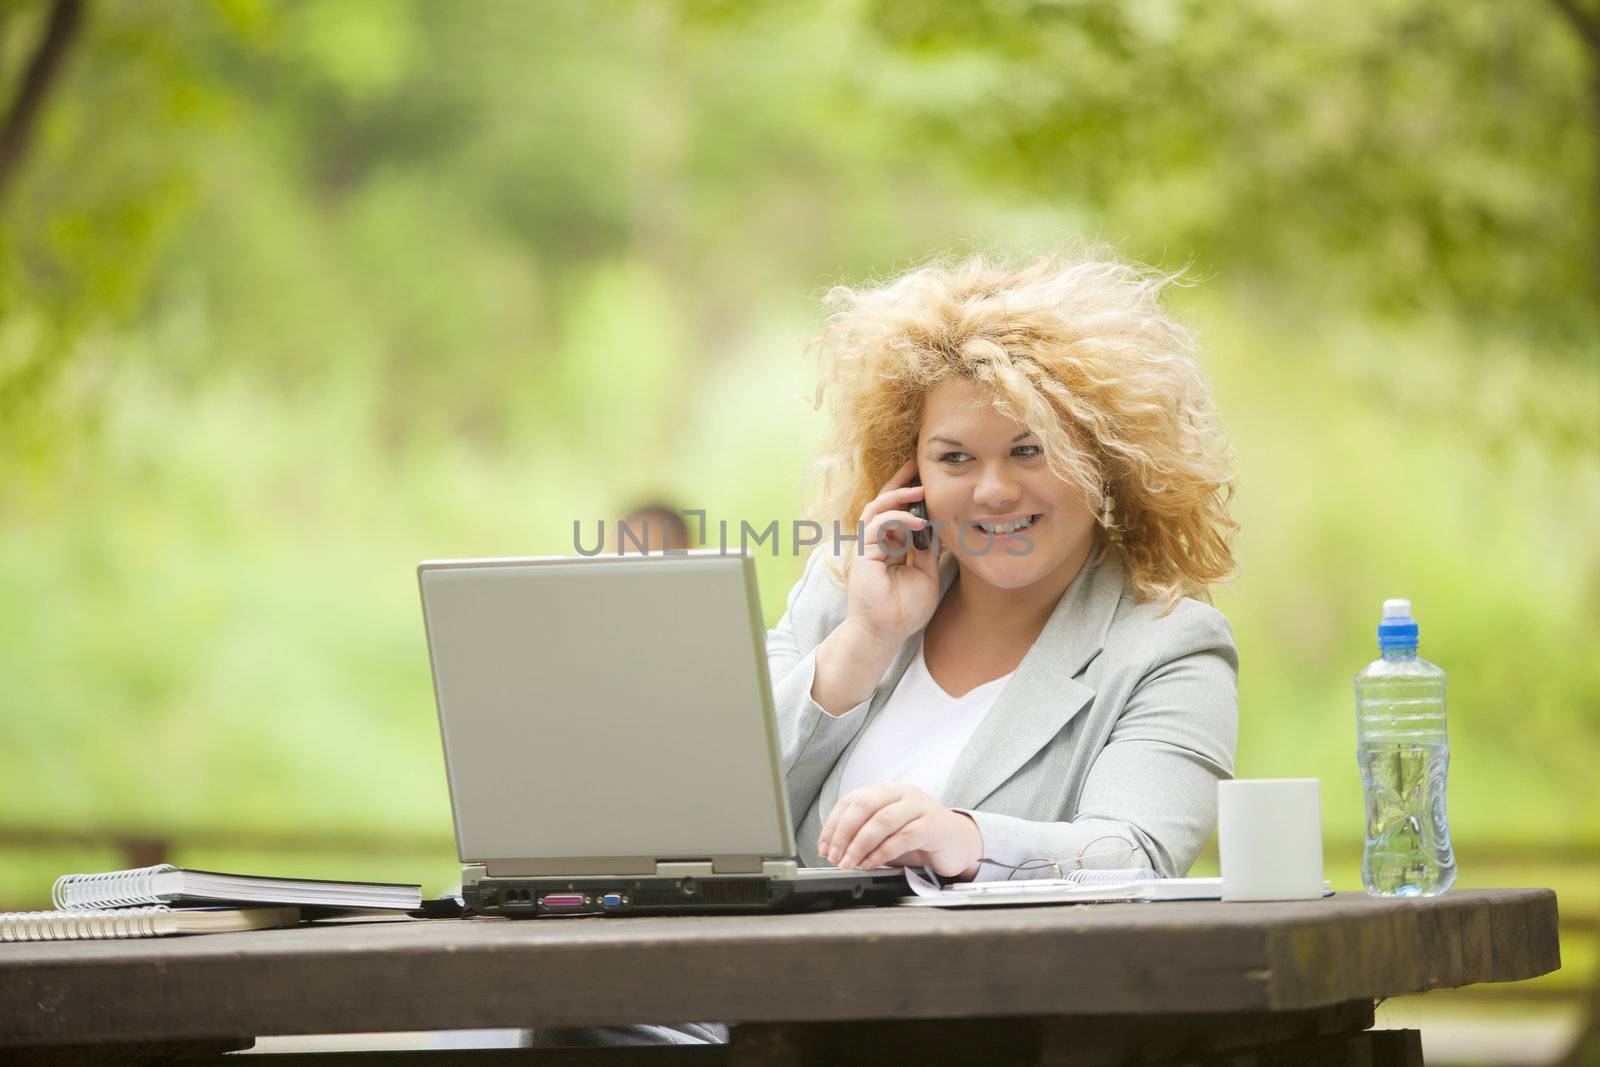 Young woman using laptop and phone in park